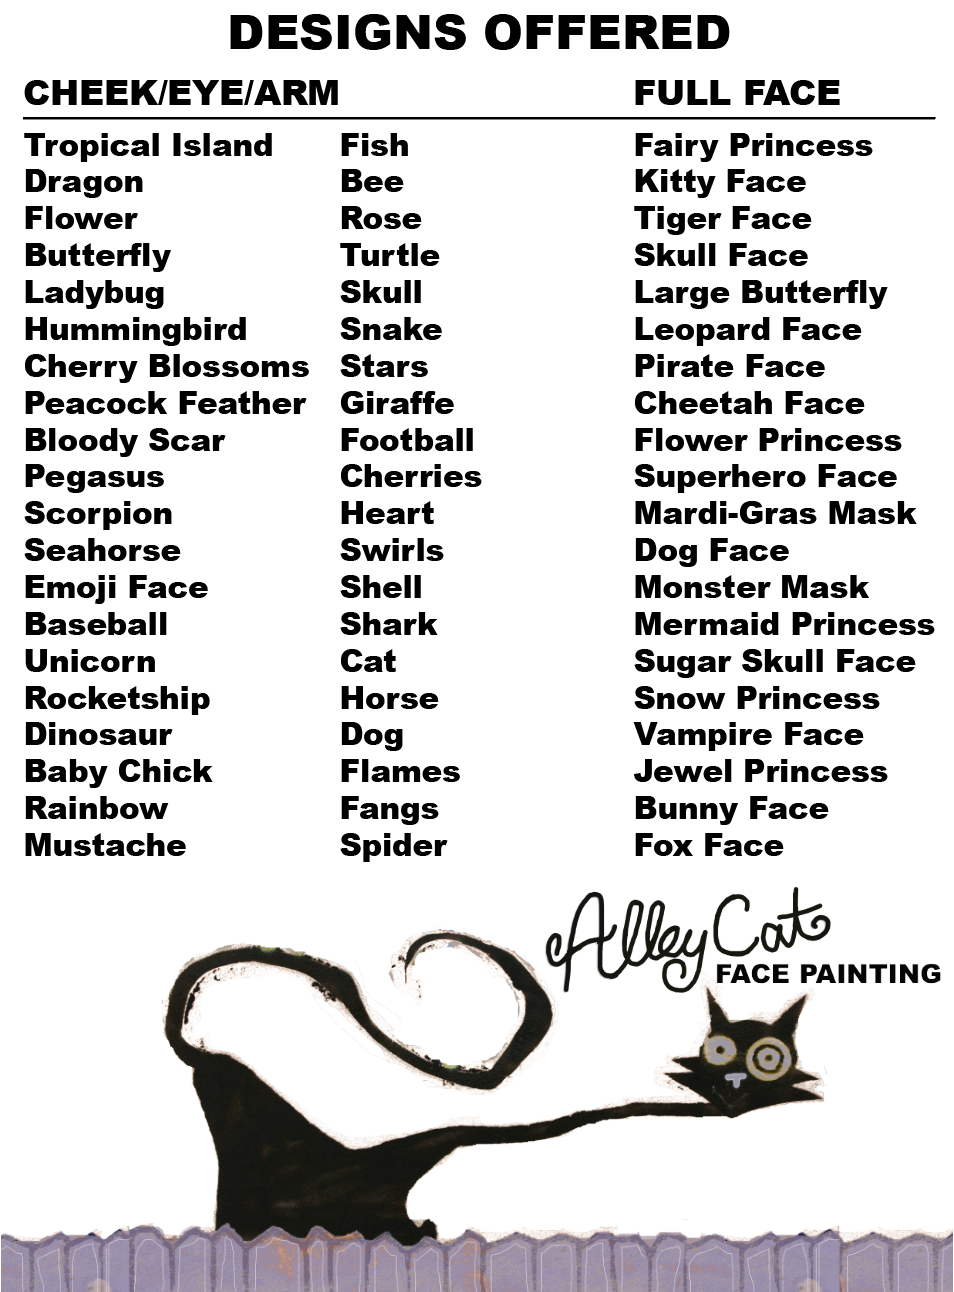 Full menu list for Alley Cat of over 50 designs offered